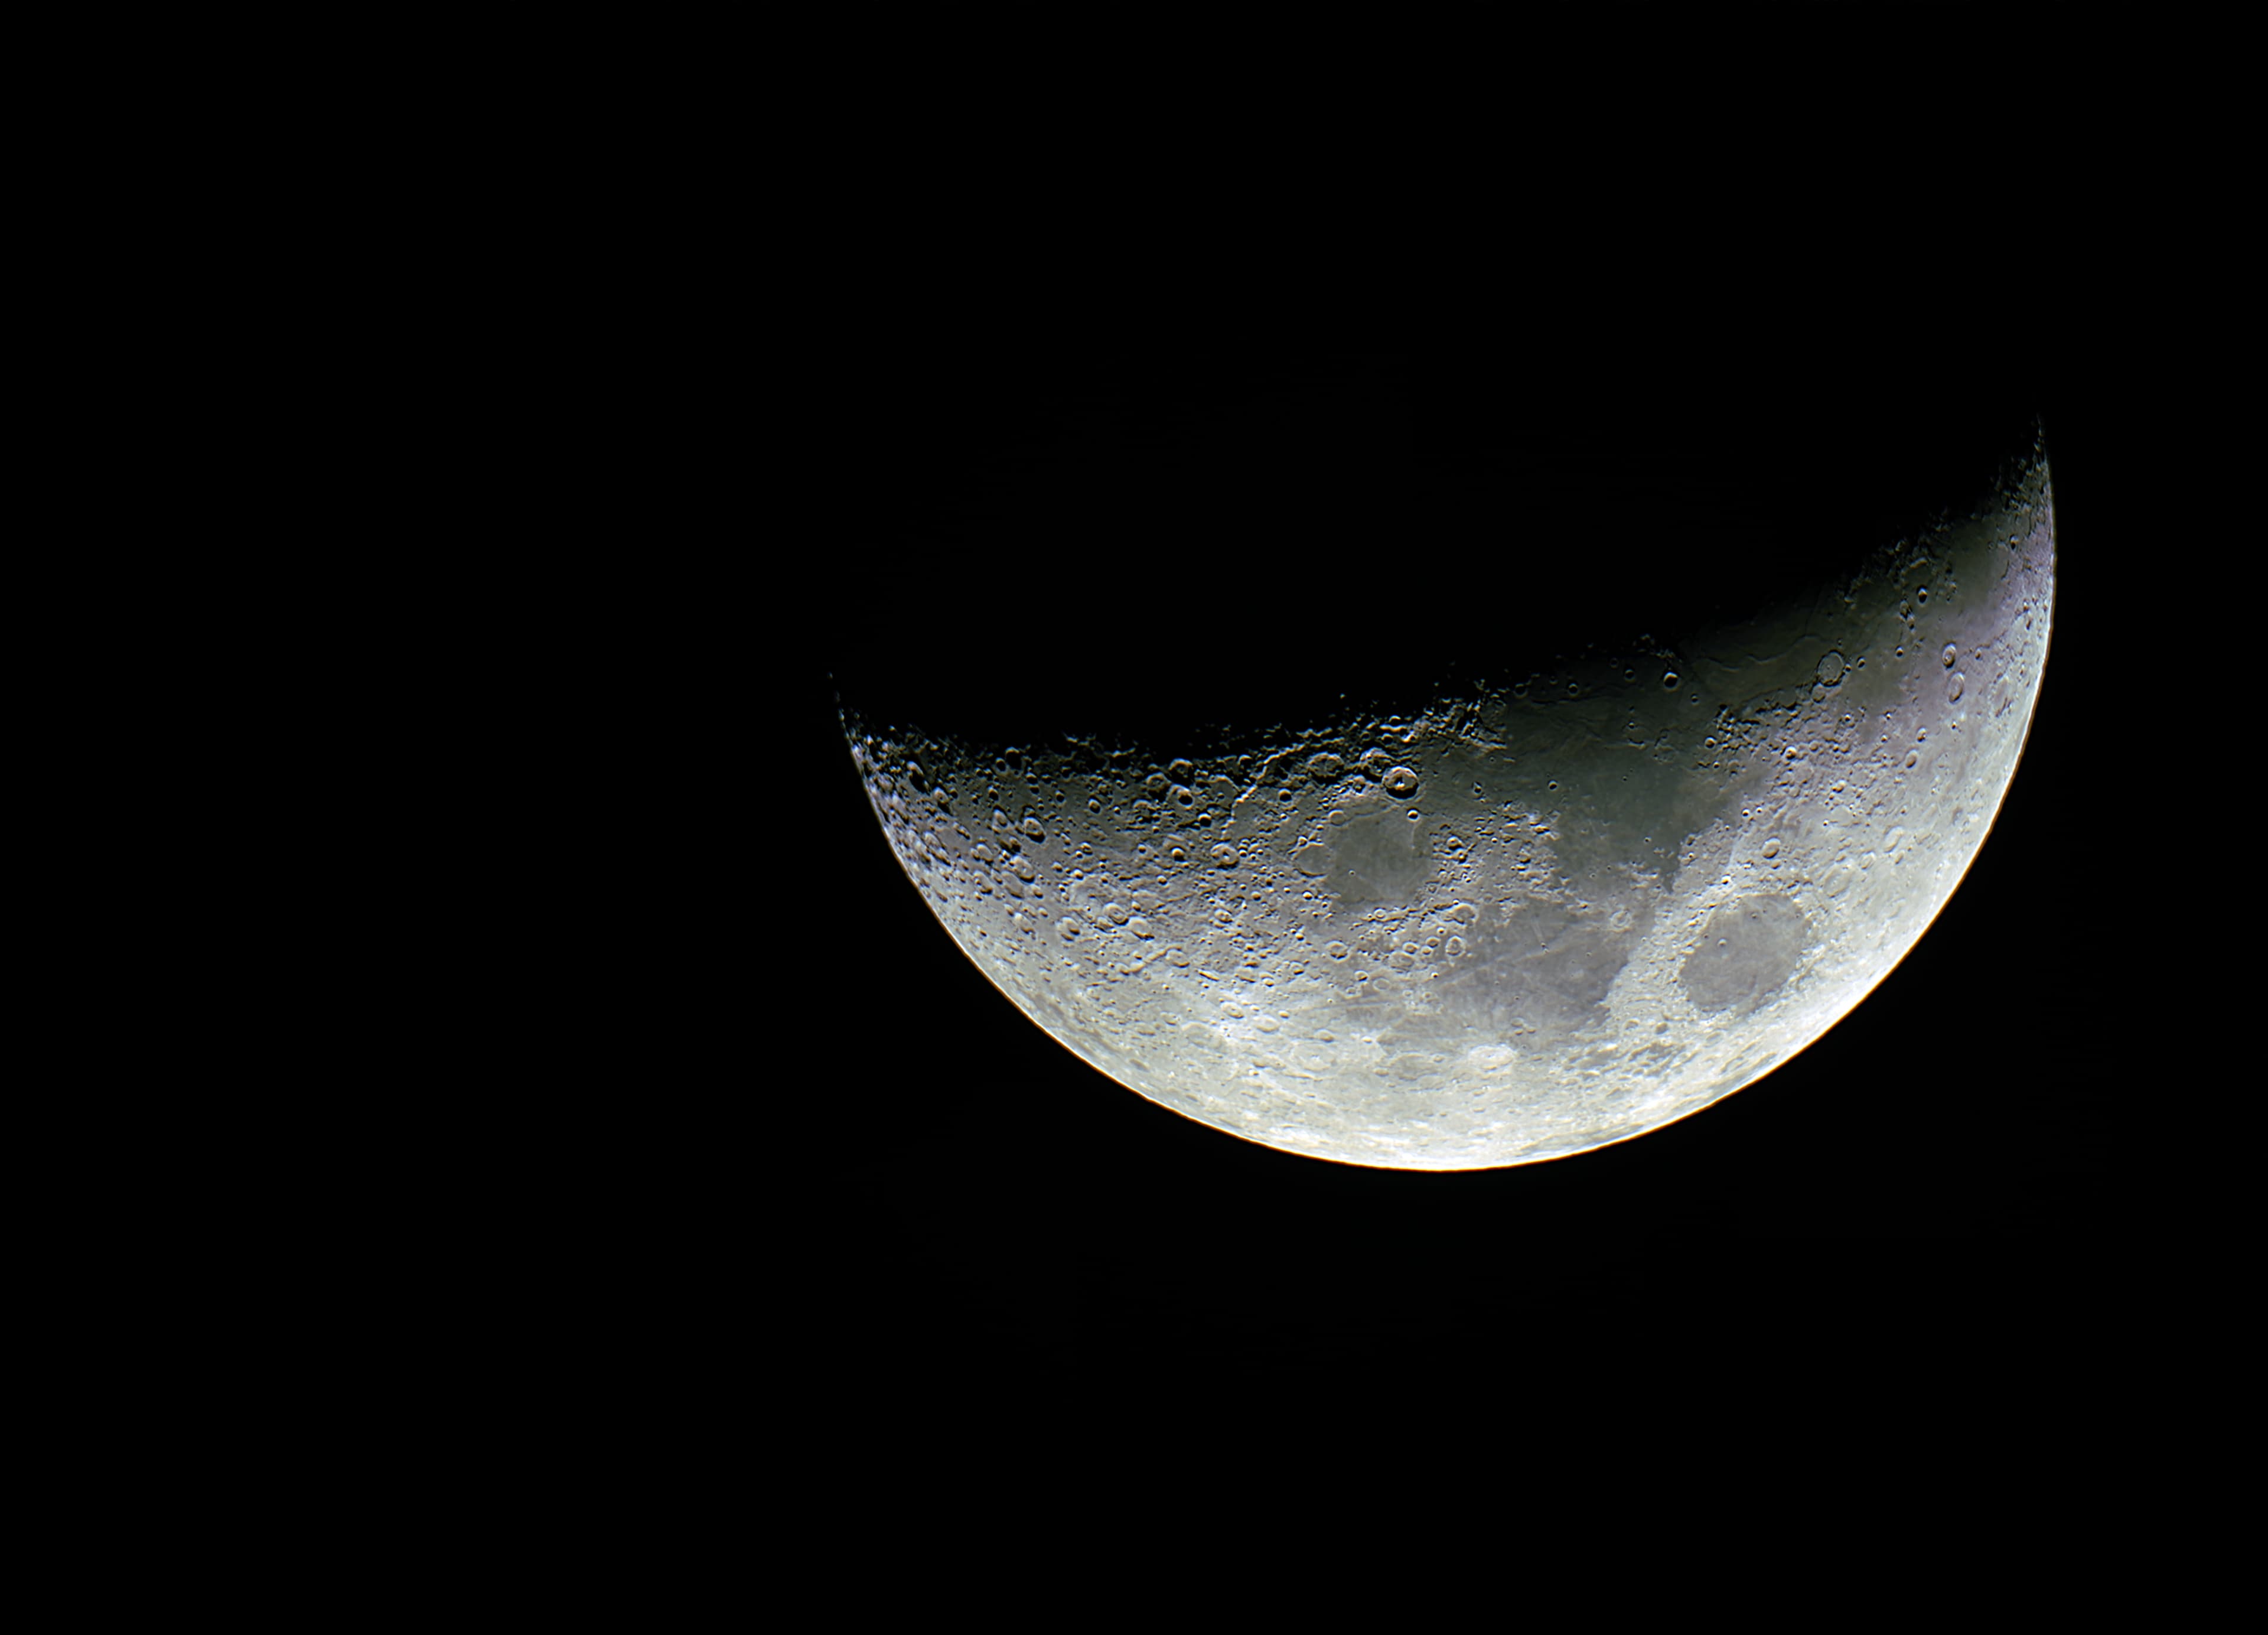 Generic Moon Photo test - after my mount broke!